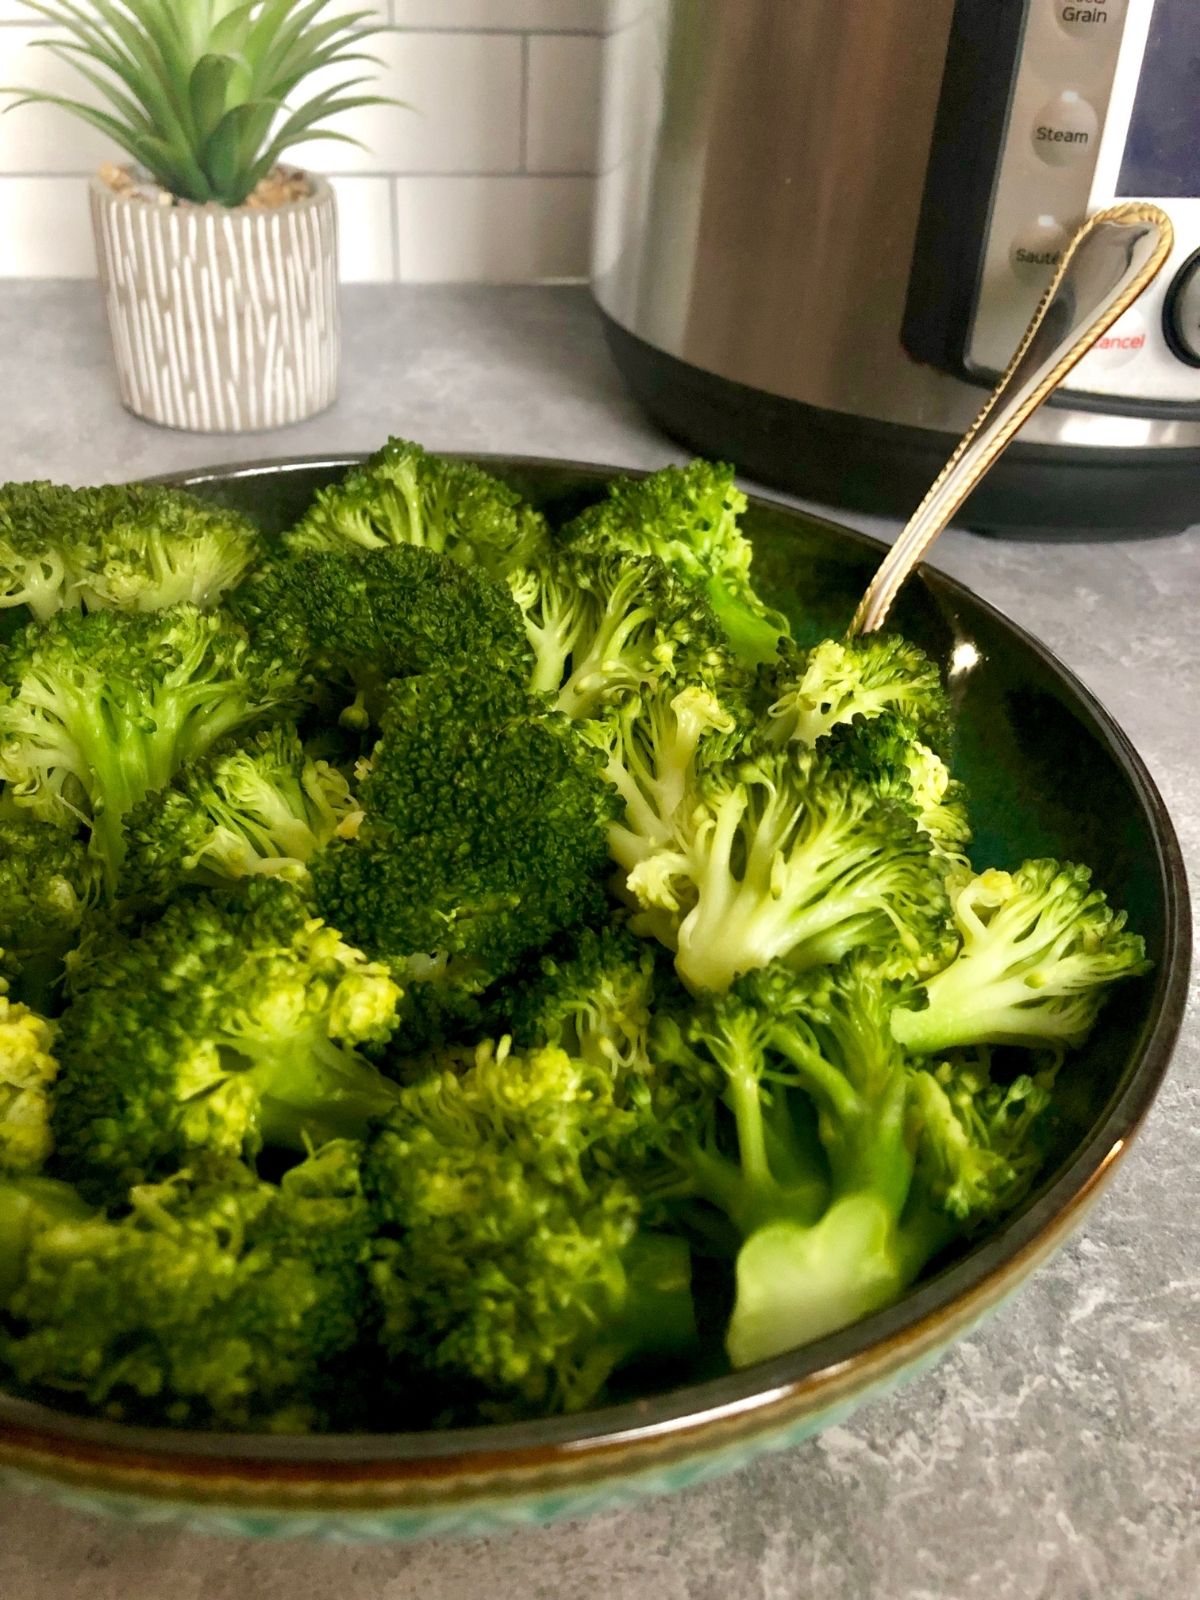 bowl of steamed broccoli with instant pot and plant in background.